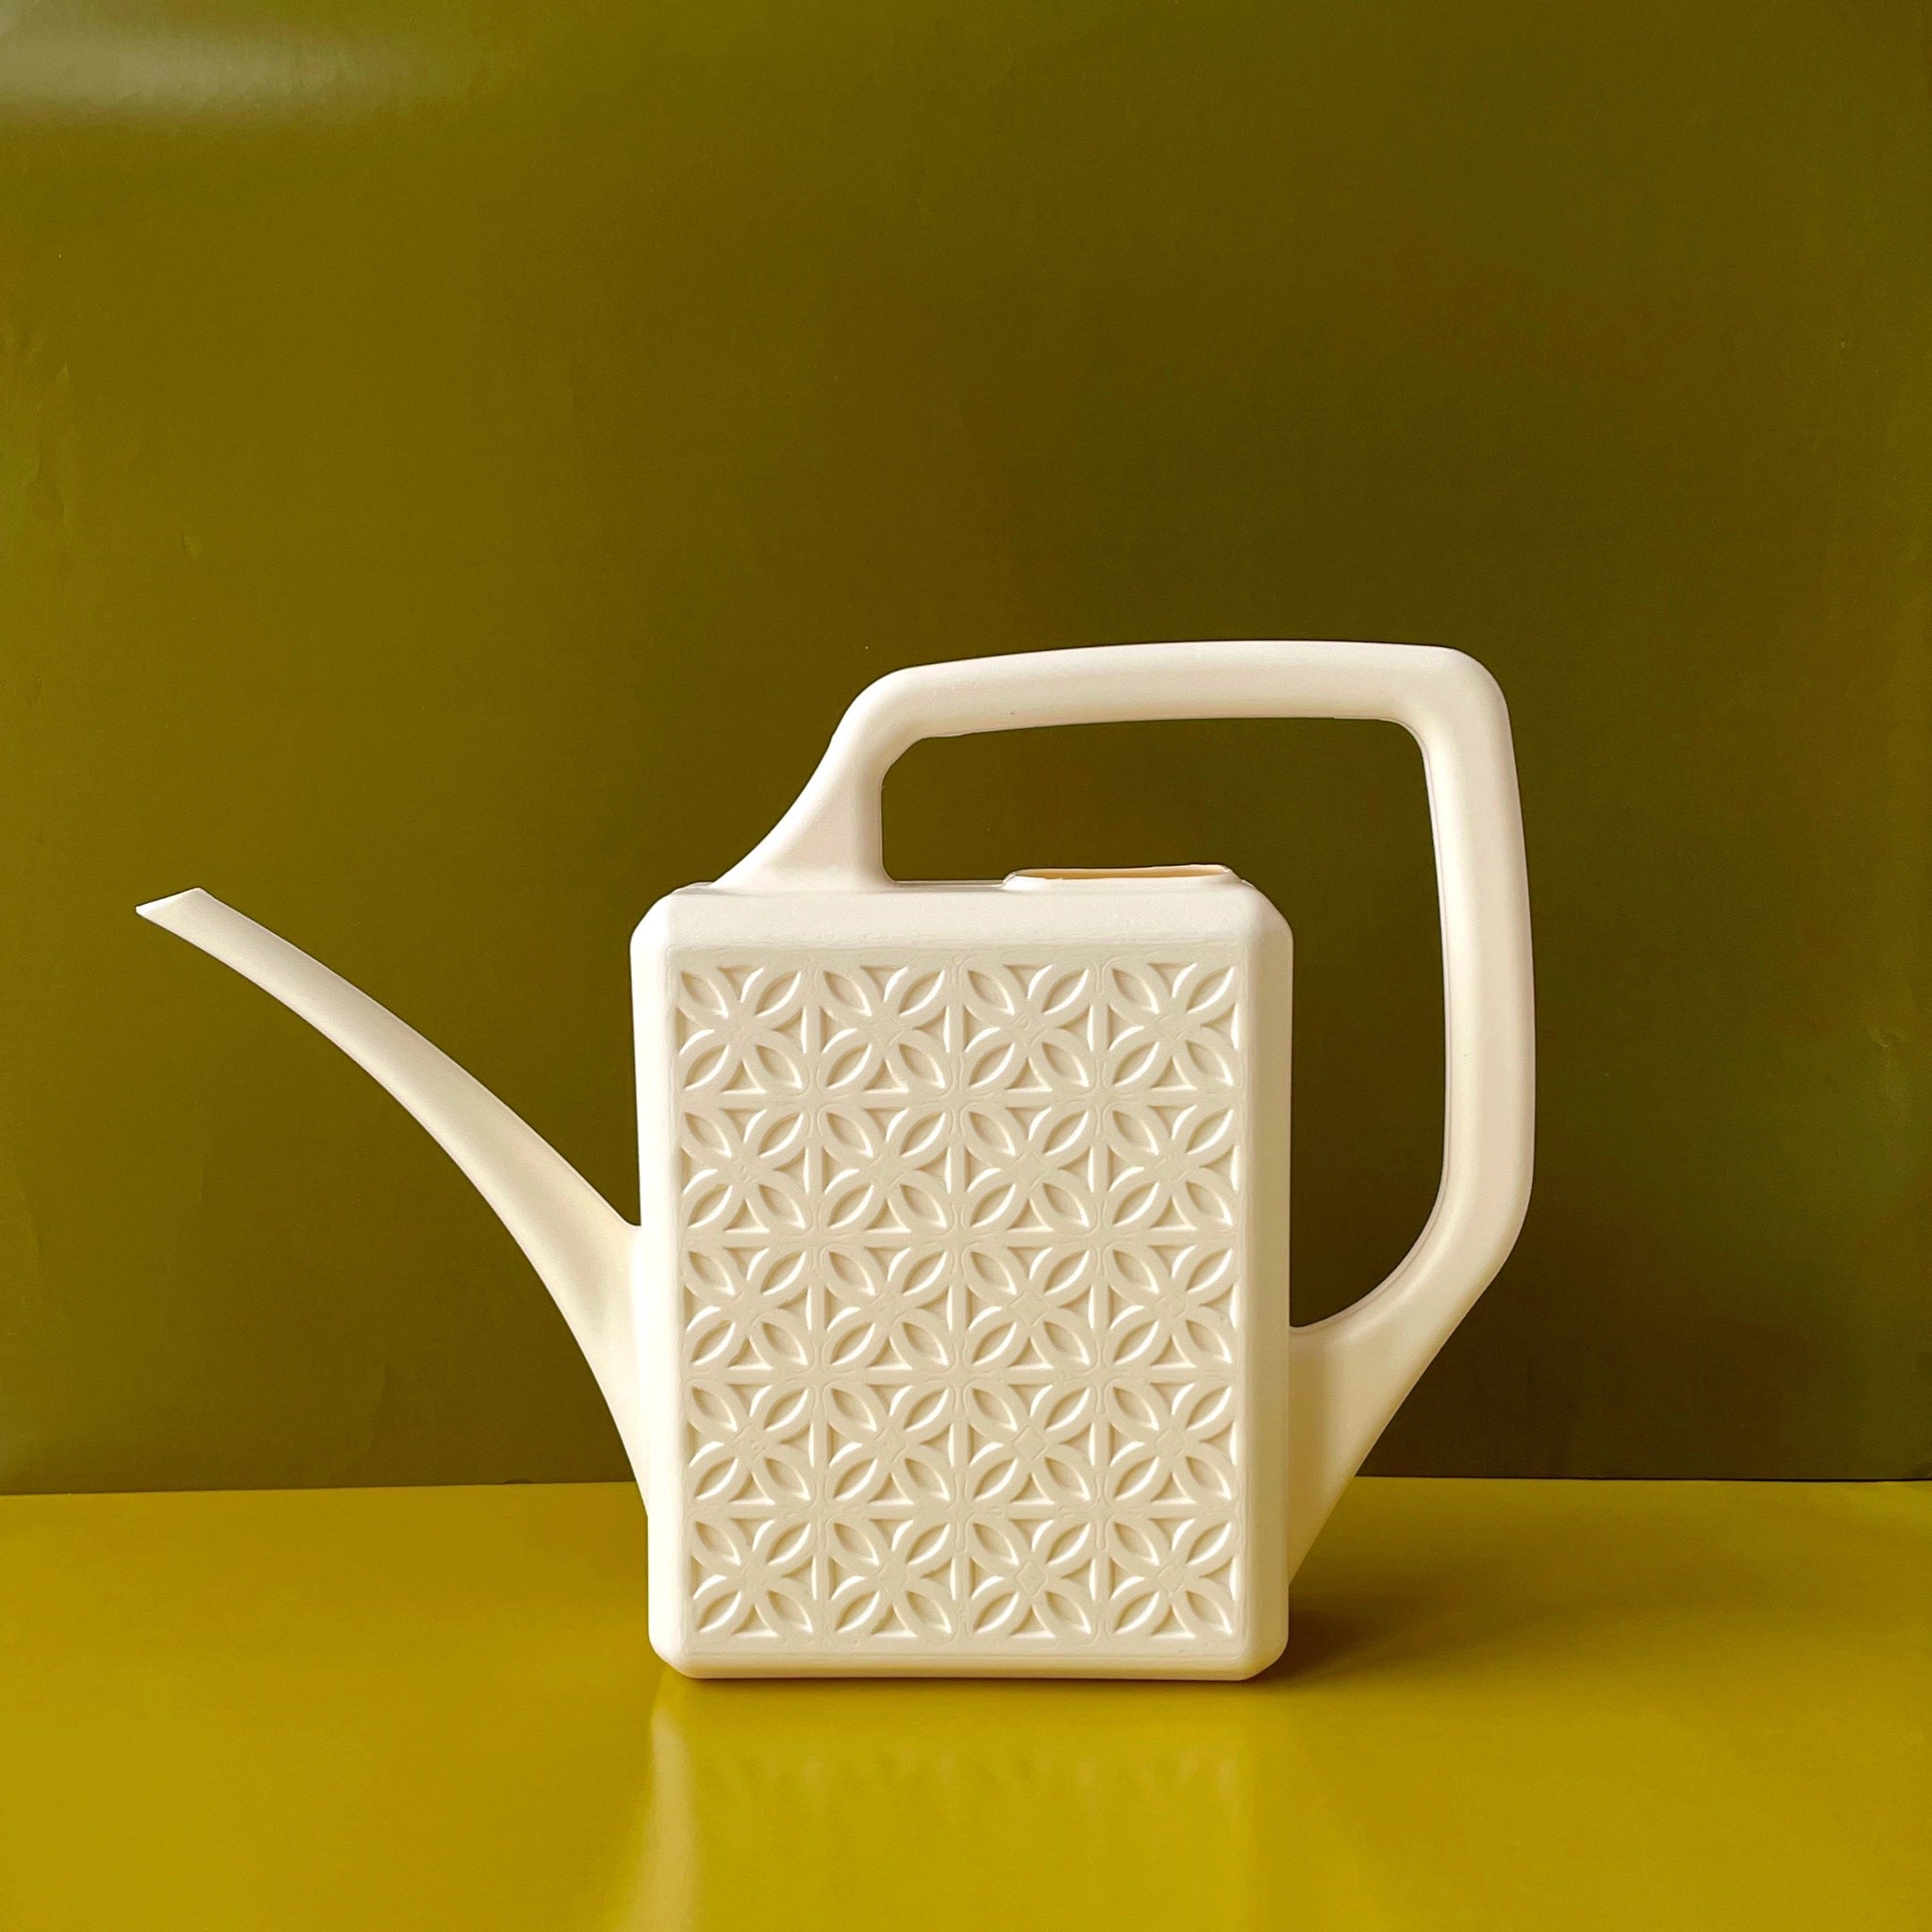 An ivory plastic watering can with a narrow spout and square handle and a rectangle breeze block design on the sides. The background is an olive green hue.